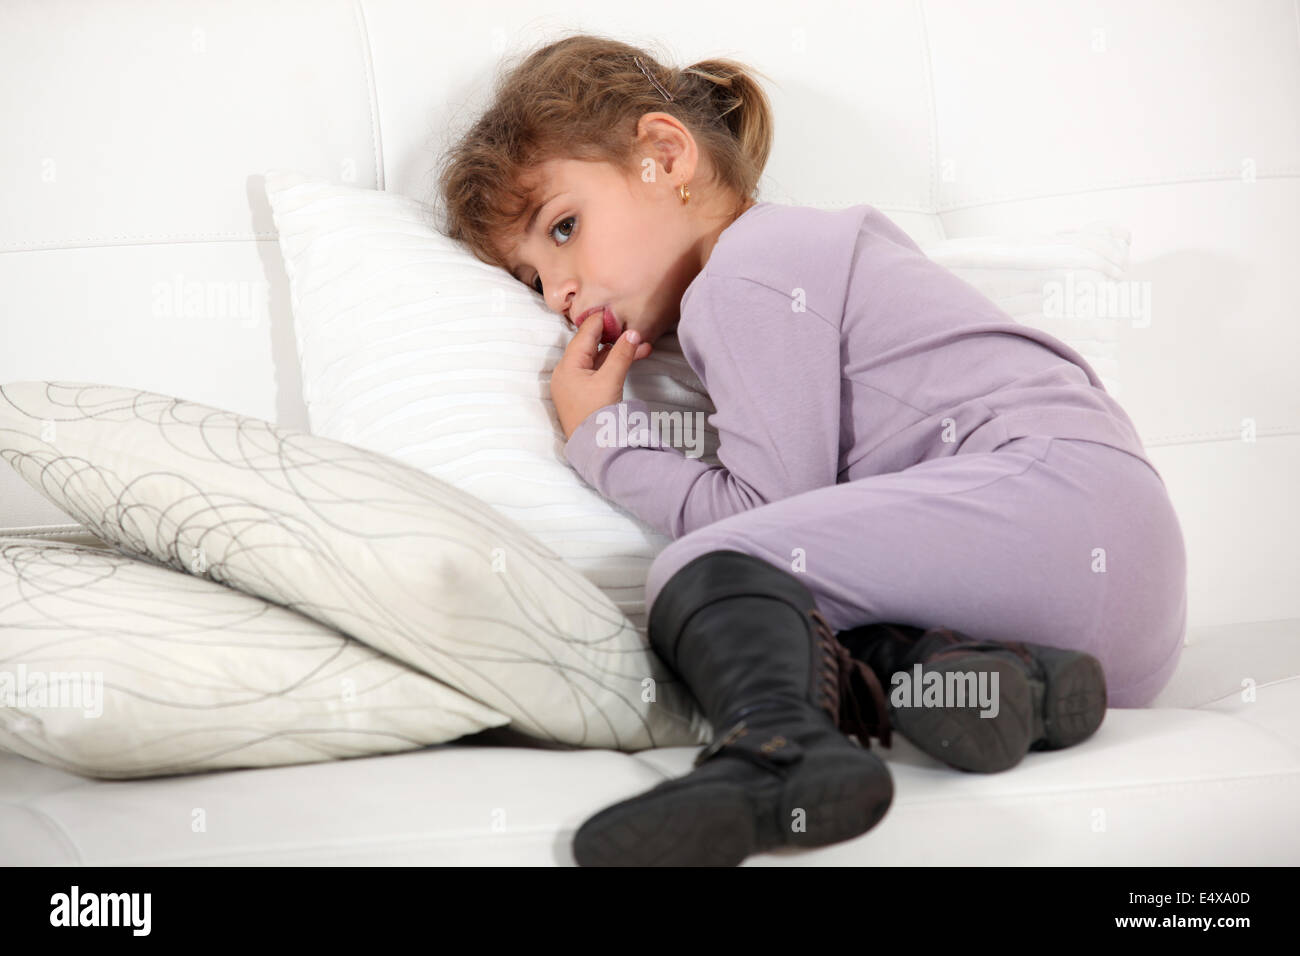 Young girl licking her fingers Stock Photo